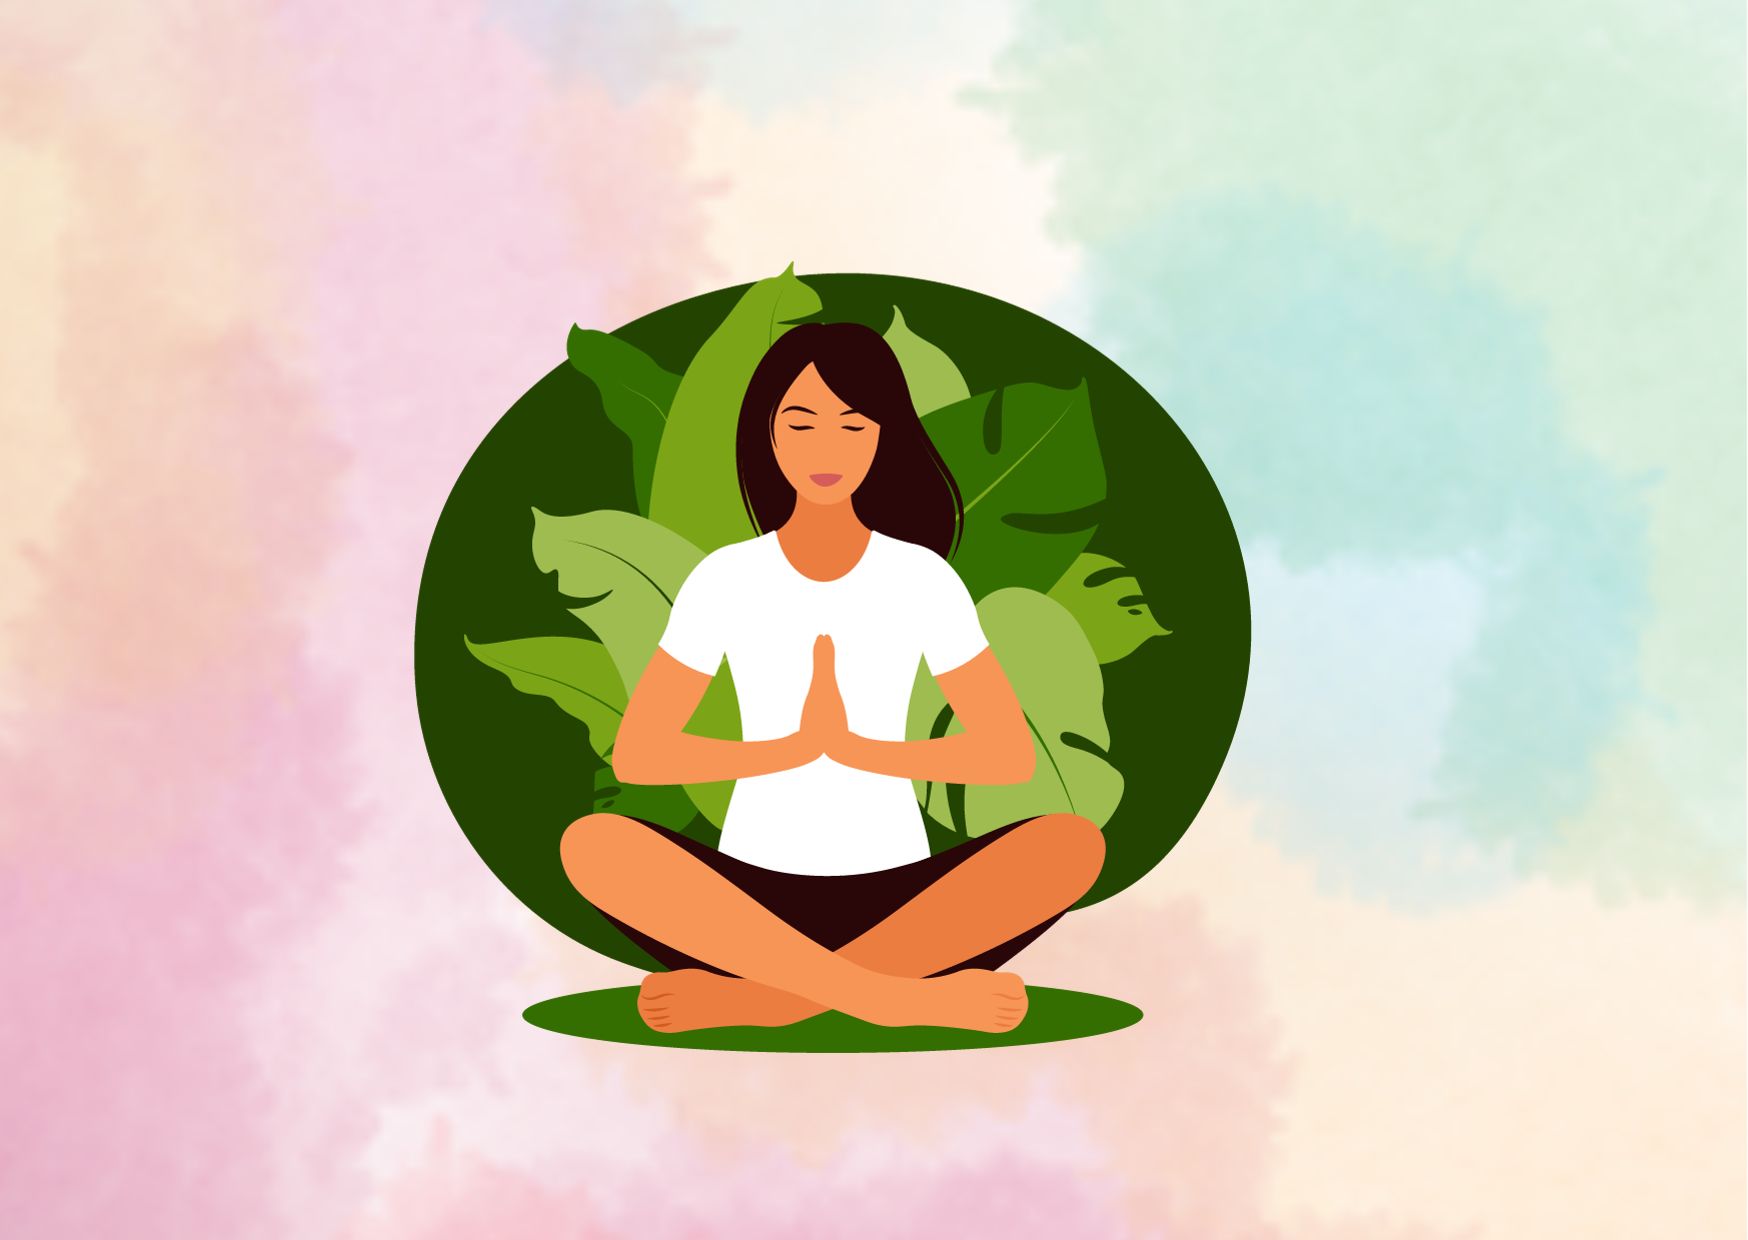 Wellbeing with Meditation